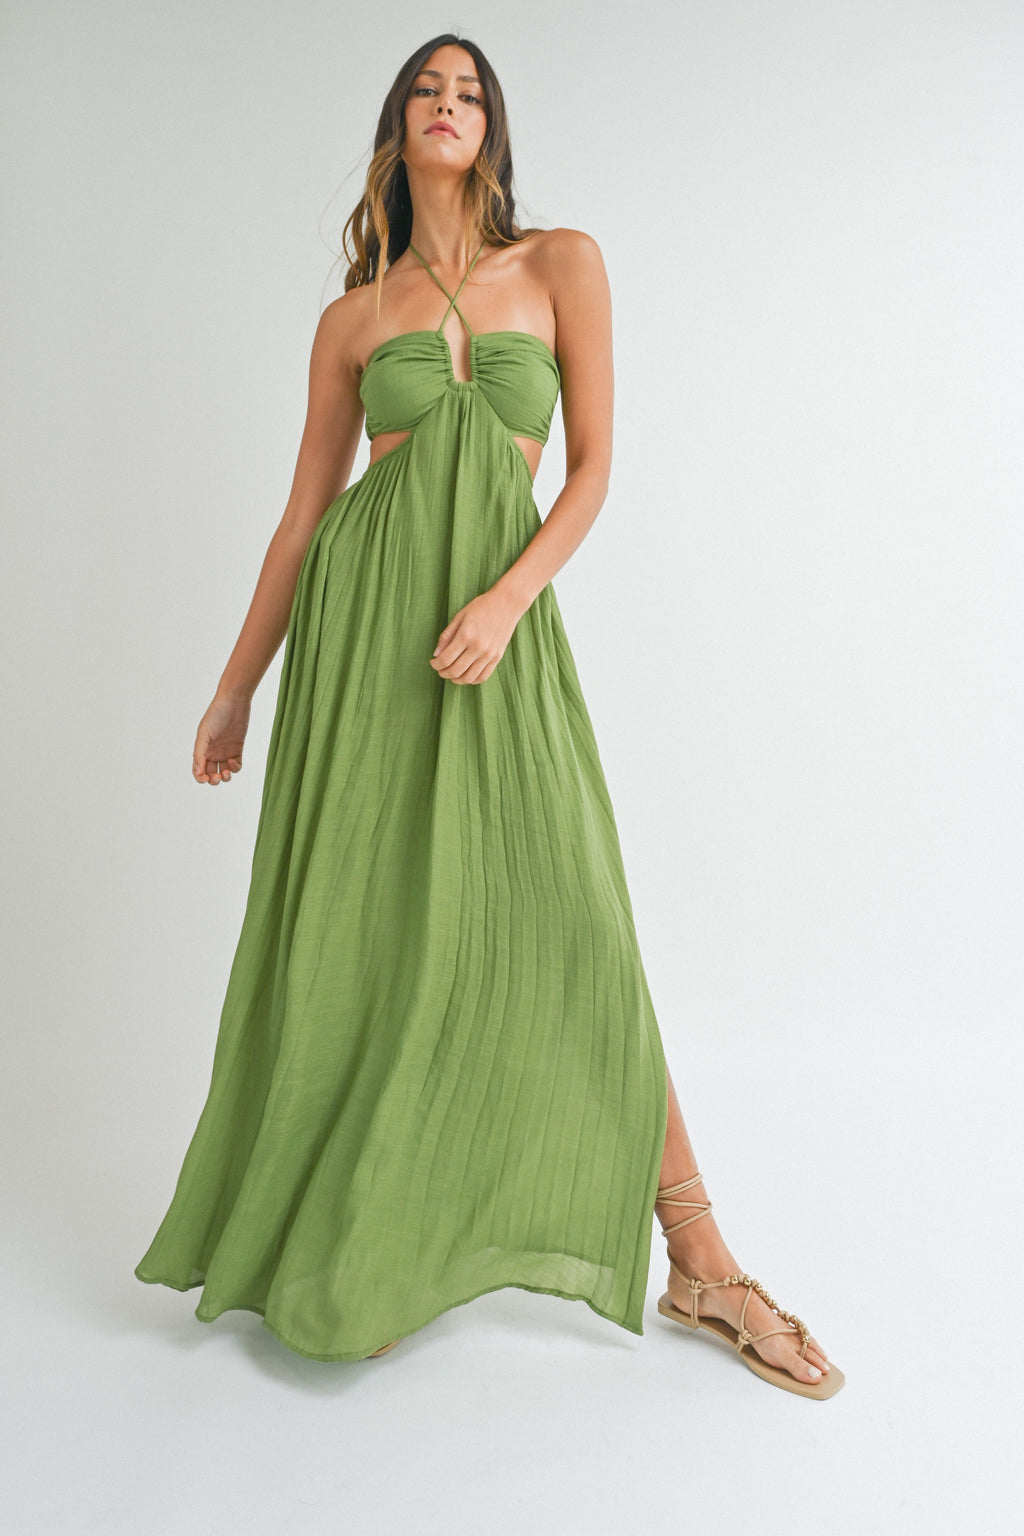 Kiwi Green gauze halter style maxi dress with cut out sides and back